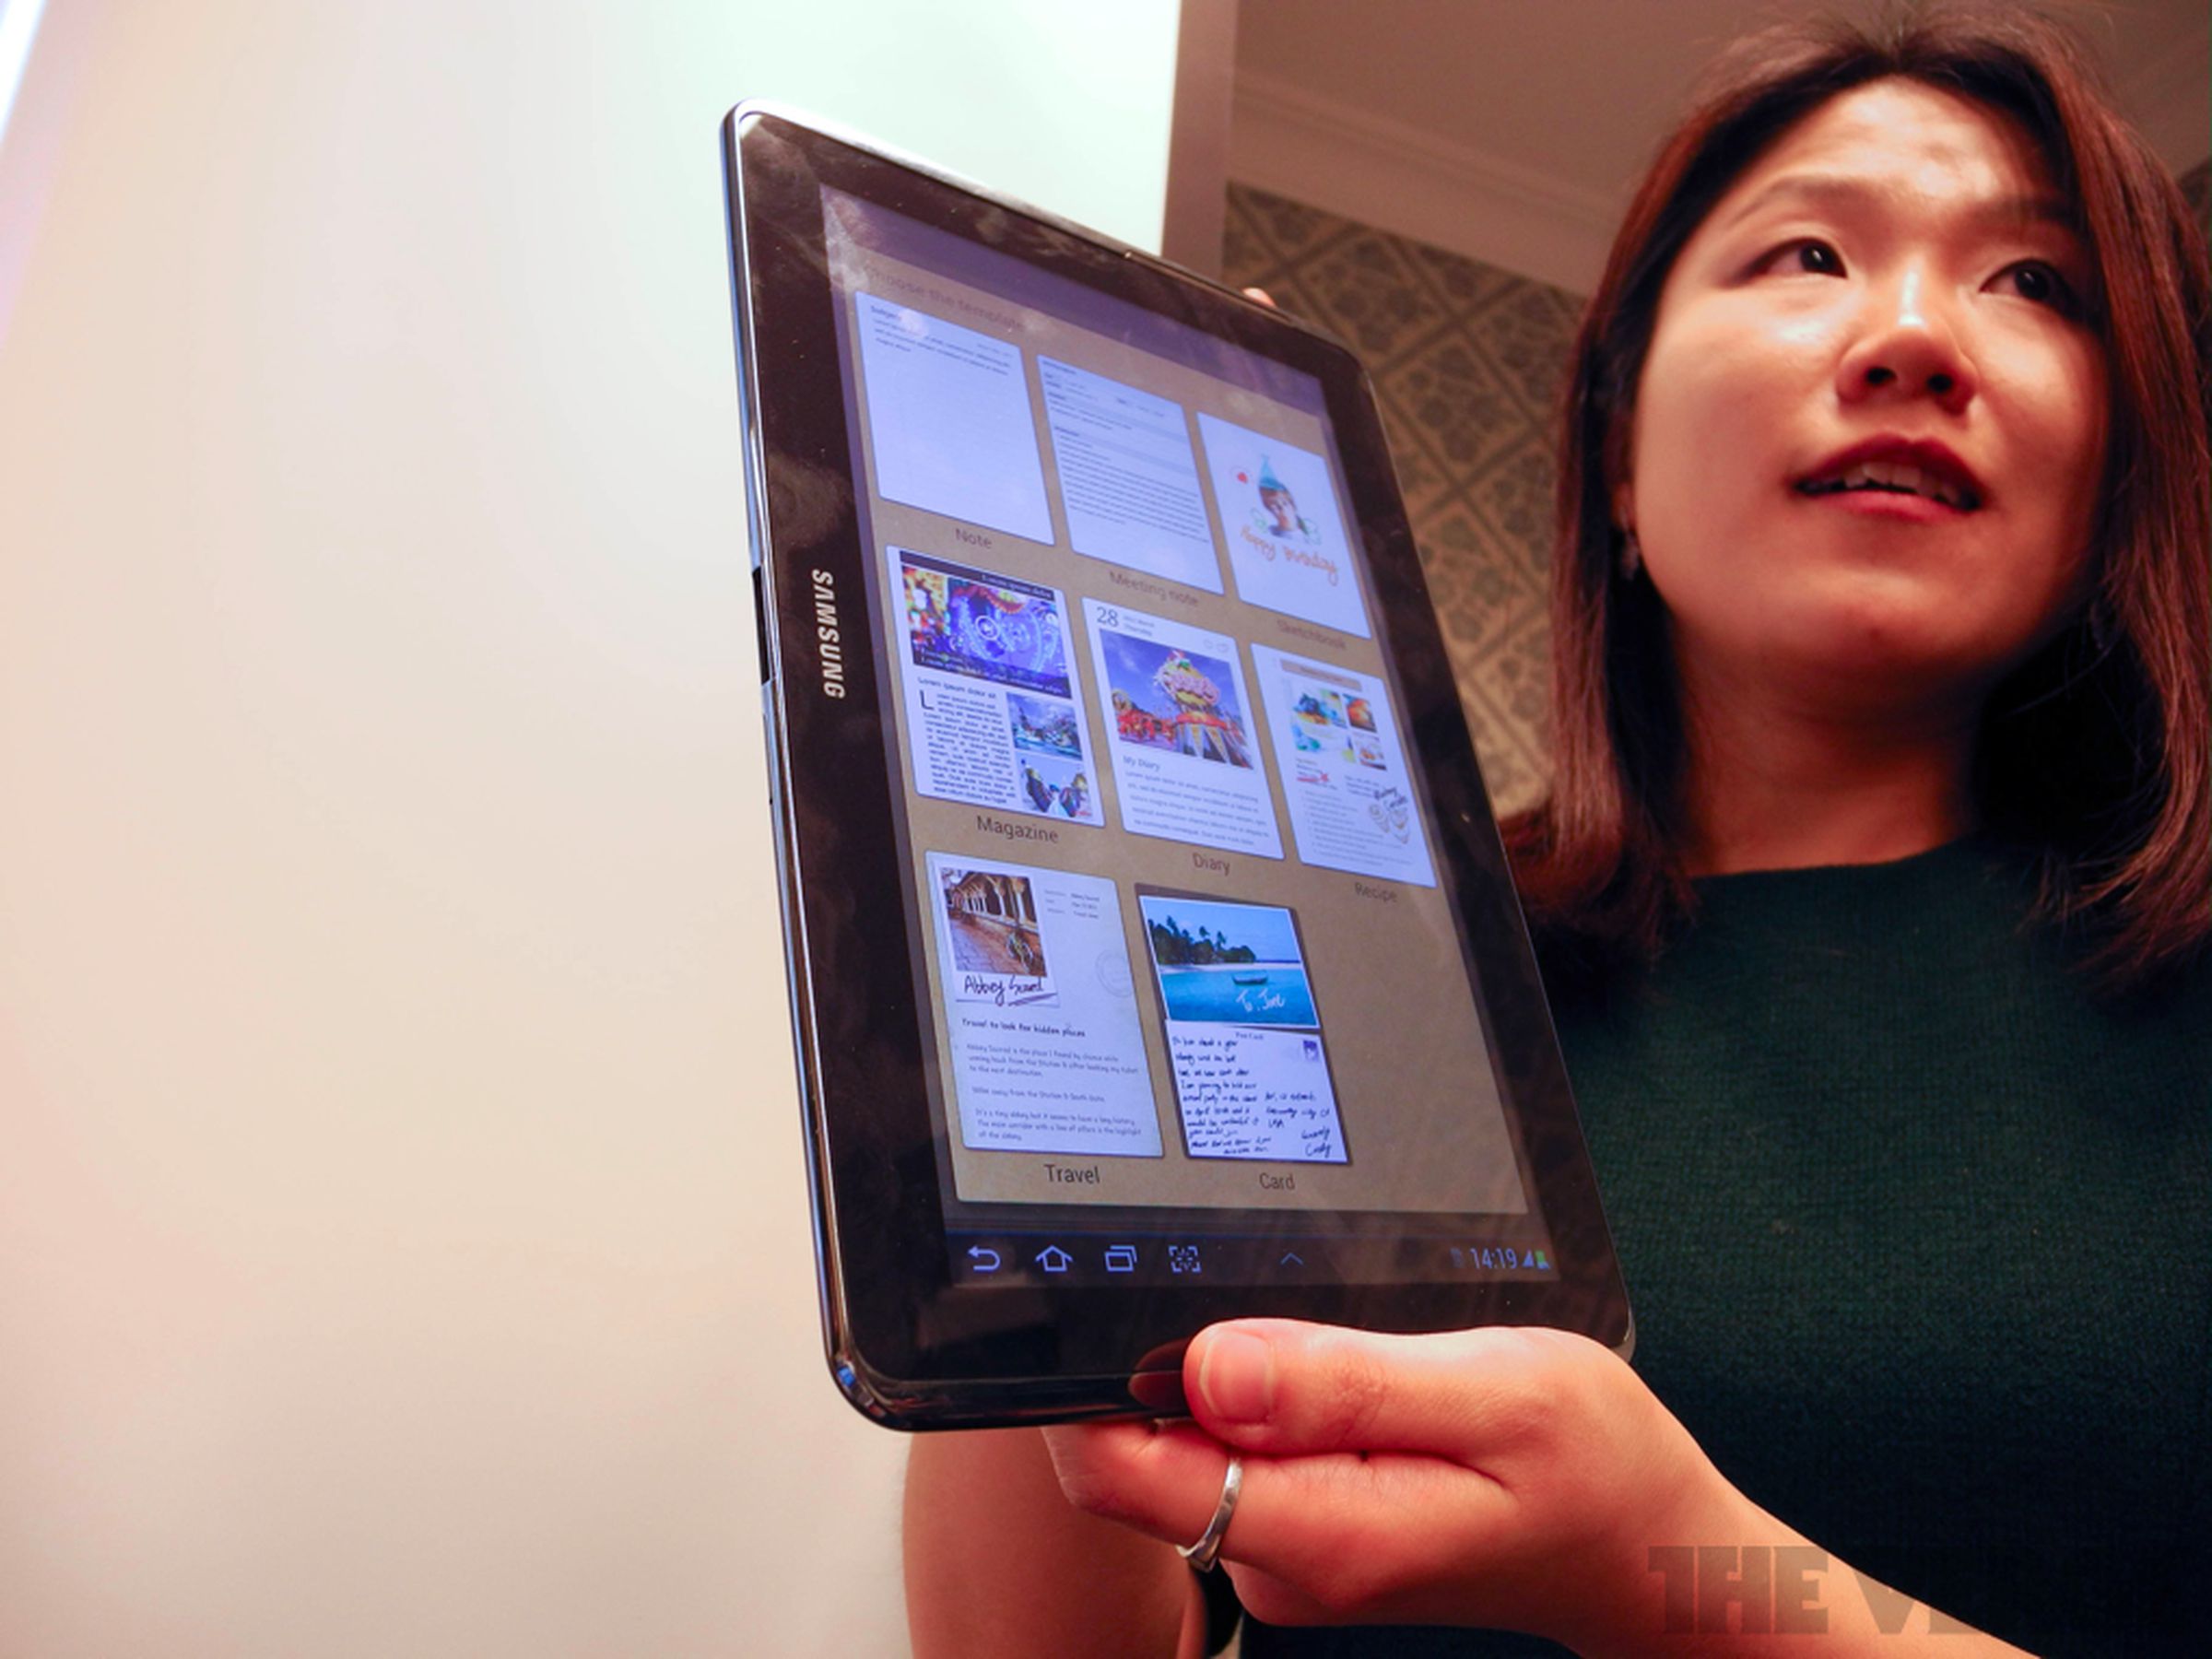 Samsung Galaxy Note 10.1 more hands-on